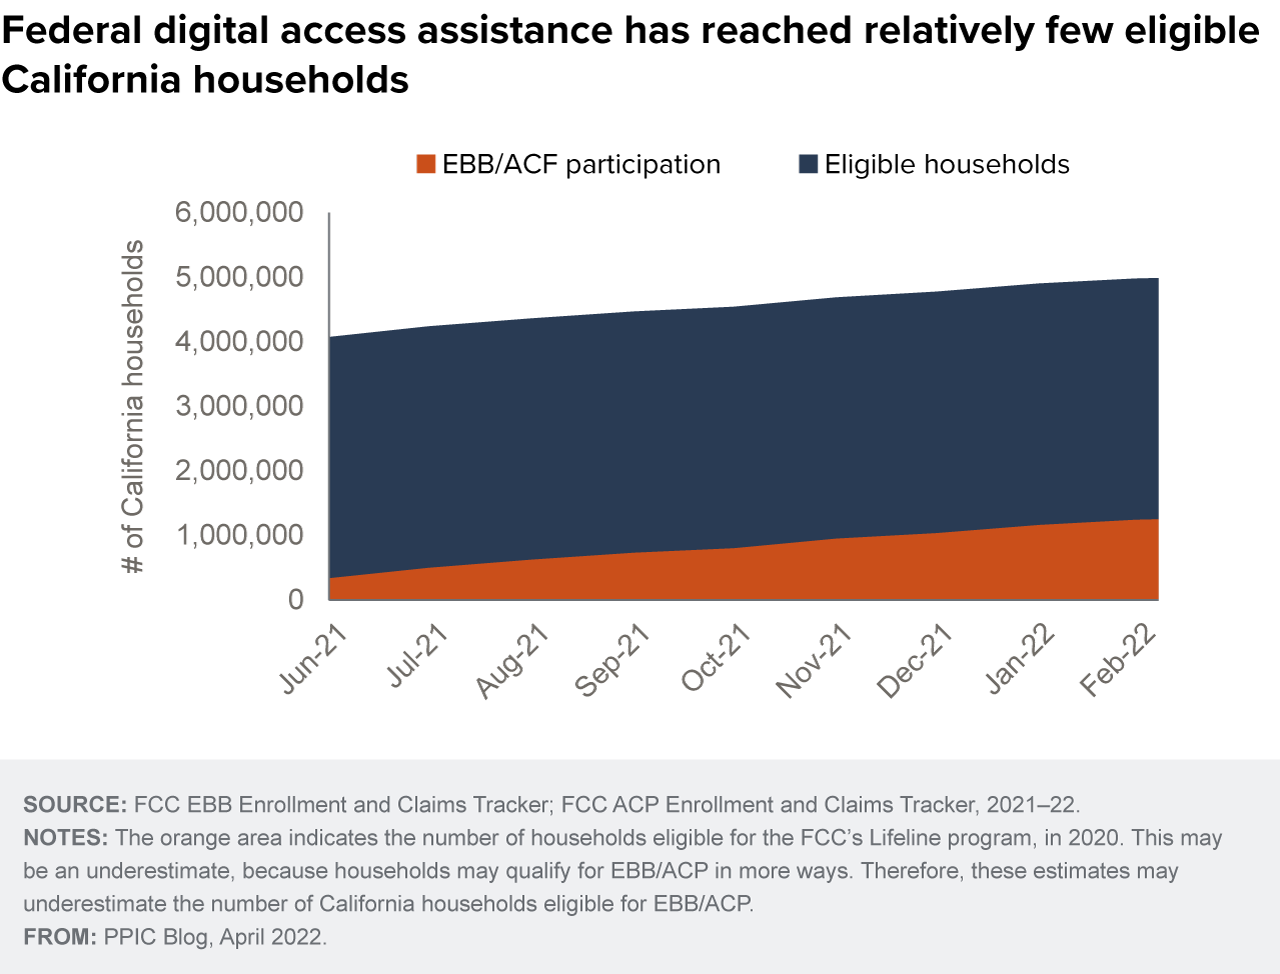 figure - Federal digital access assistance has reached relatively few eligible California households